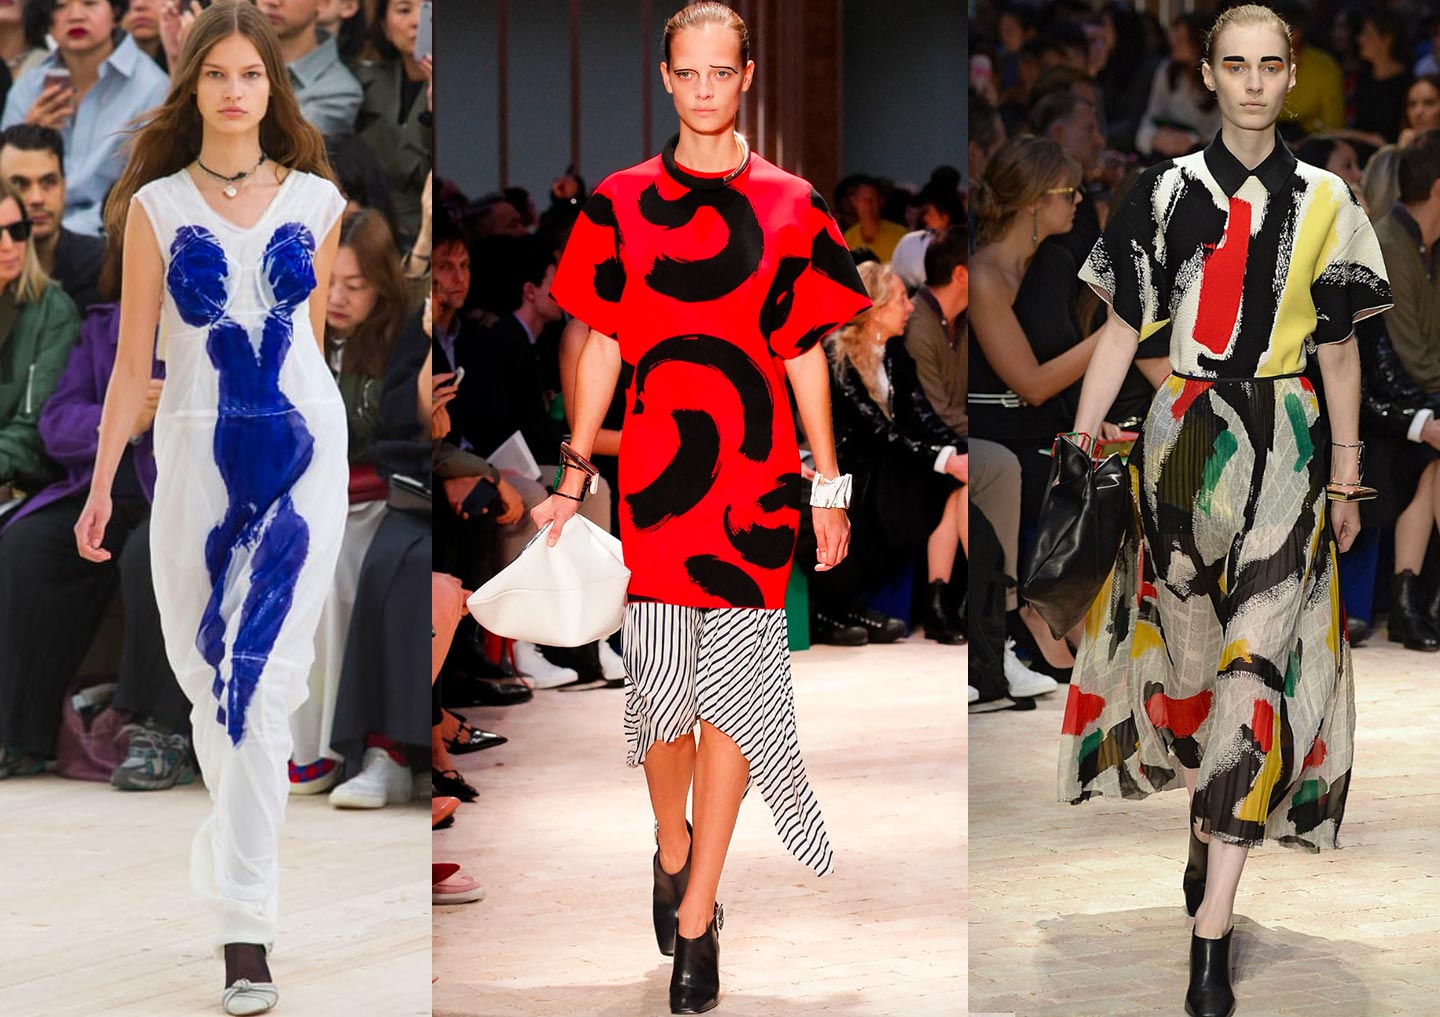 Former Céline creative director Phoebe Philo is also well known for her prints